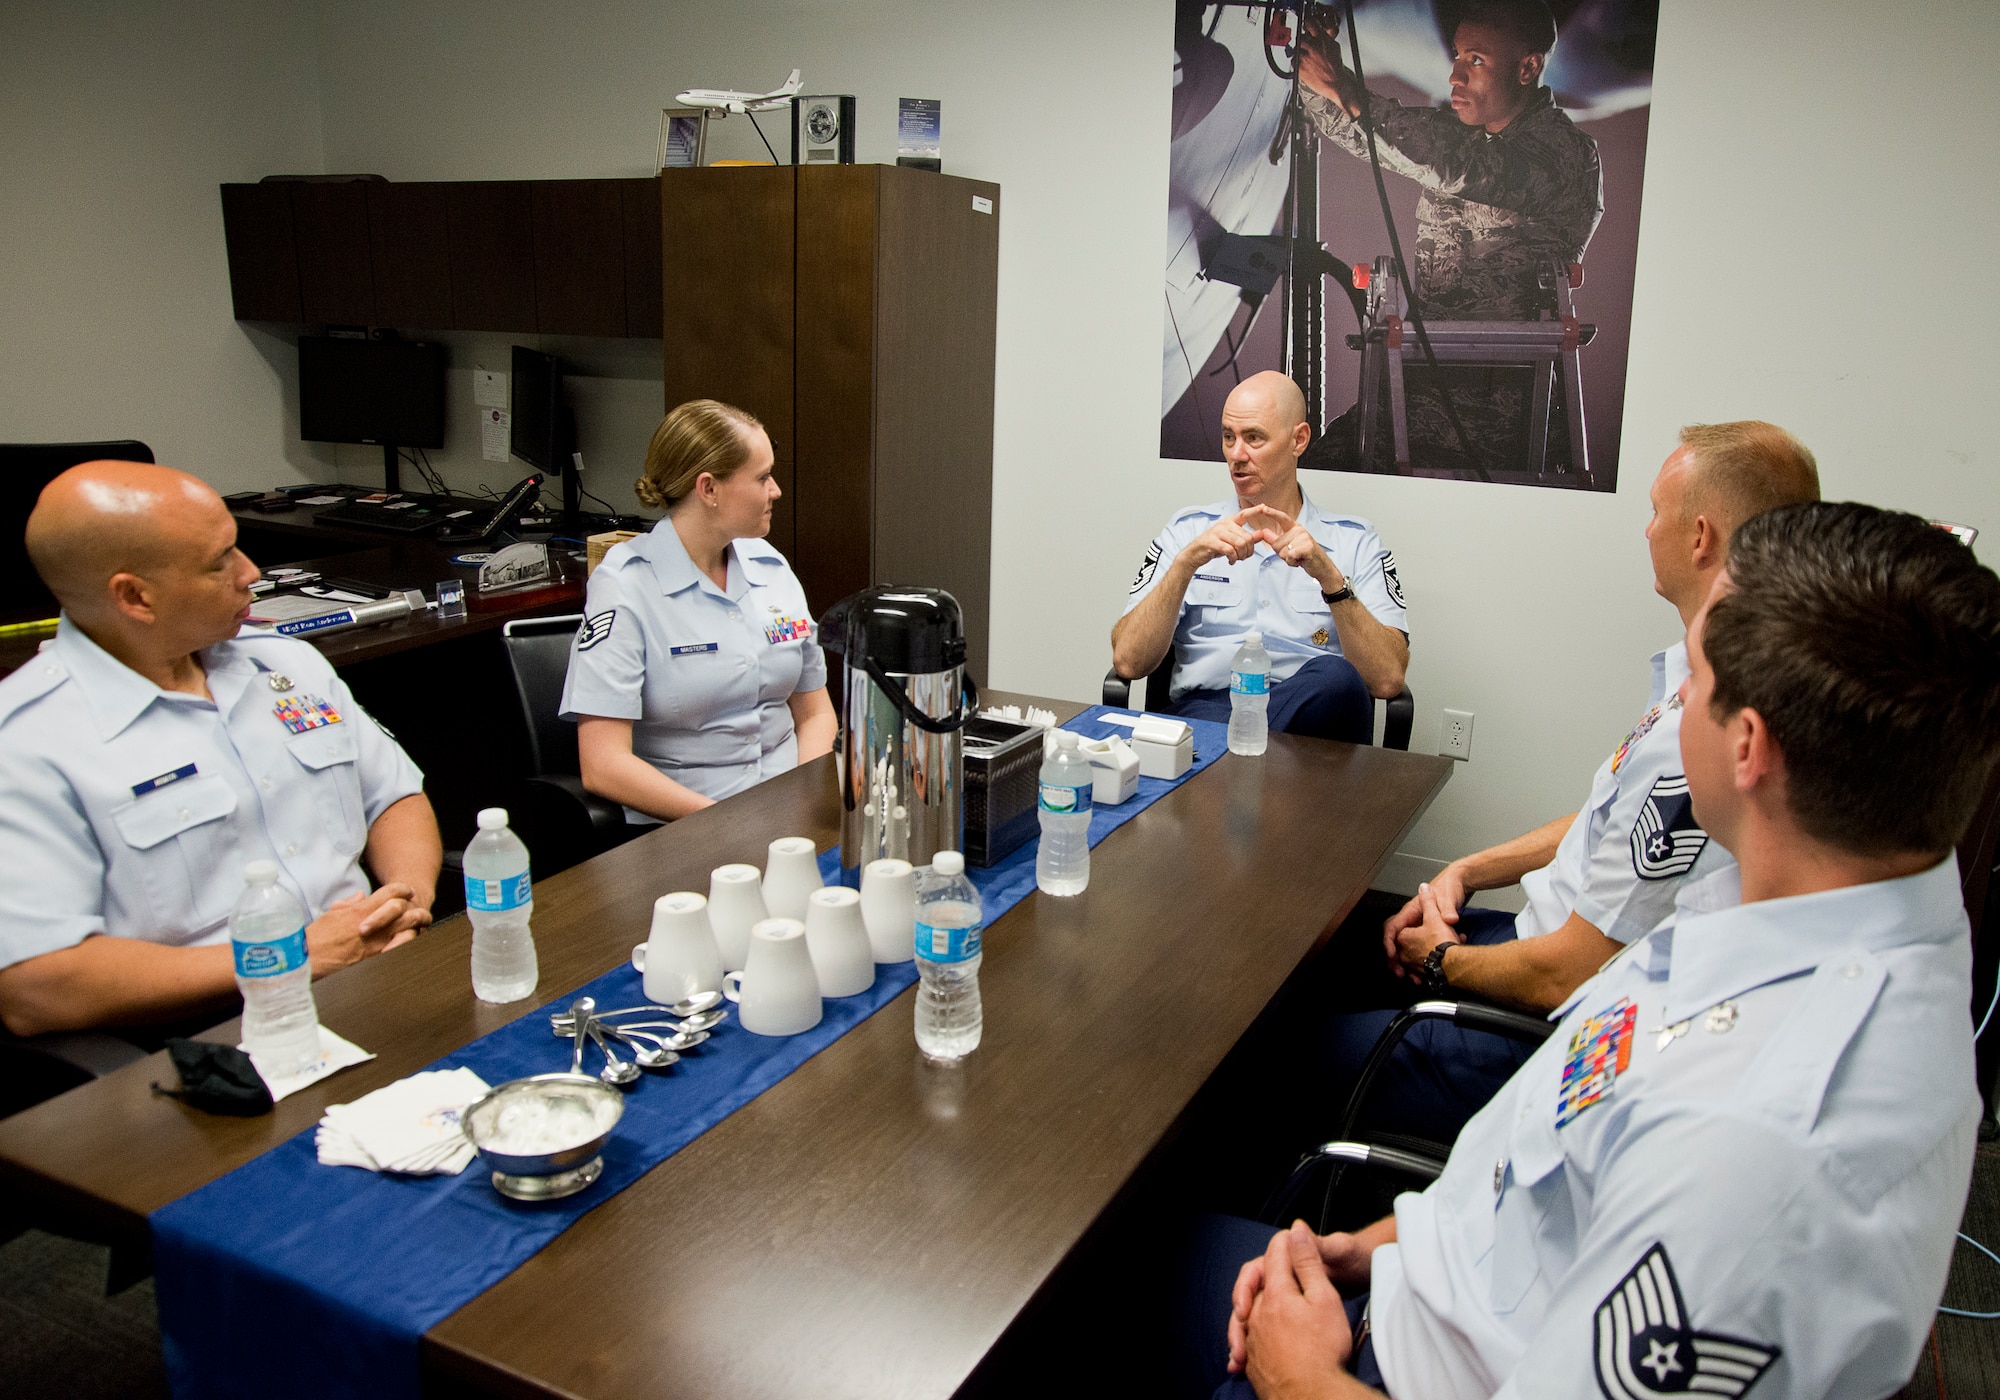 Air National Guard Command Chief Master Sergeant Ronald C. Anderson meets with the ANG's 2016 Outstanding Airmen of the Year during Focus on the Force Week at the Air National Guard Readiness Center on Joint Base Andrews, Md., August 4, 2016. The event is part of the ANG's Focus on the Force Week, a series of events highlighting the importance of professional development at all levels, and the recognition of accomplishments throughout the enlisted corps. The OAY winners are Staff Sgt. Jennifer Masters, Airman of the Year; Tech. Sgt. Nicholas Jewell, Non-Commissioned Officer of the Year; Senior Master Sgt. Mark Farmer, Senior Non-Commissioned Officer of the Year; and Senior Master Sgt. Jack Minaya, First Sergeant of the Year. (U.S. Air National Guard photo by Staff Sgt. John Hillier)
